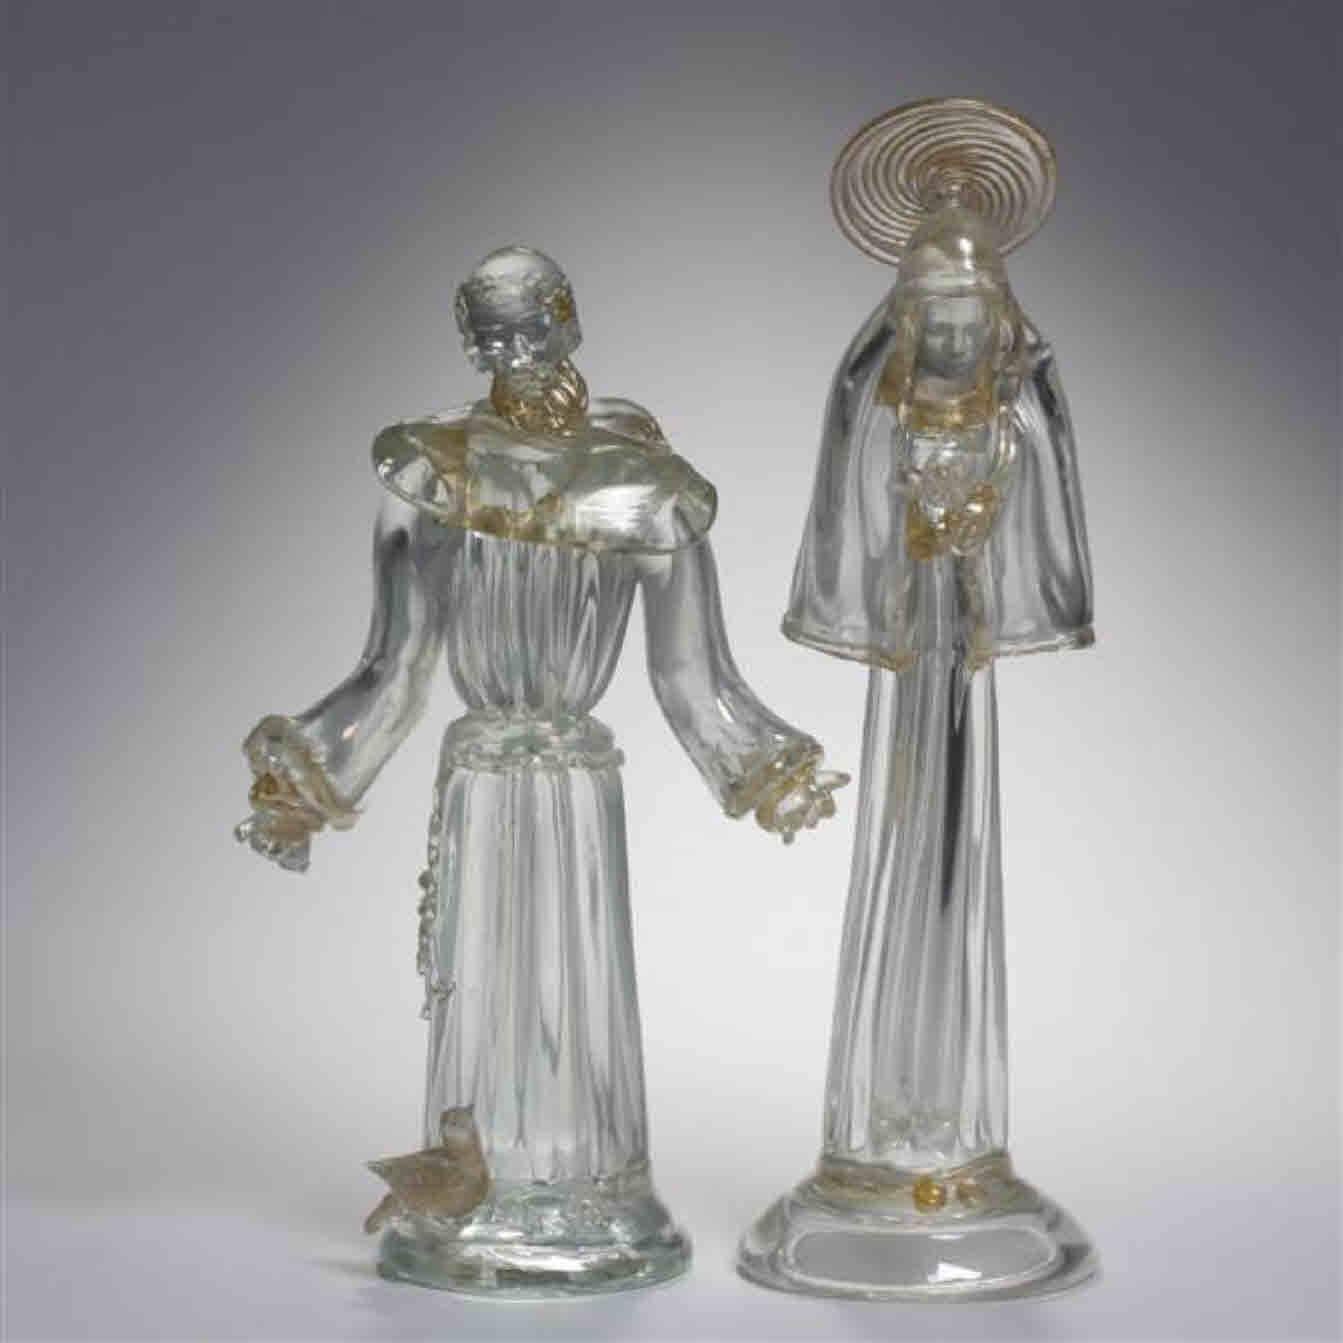 Amazing set of four Art Deco Murano figures by AVeM. Religious theme just in time for the holiday season, or all year round.